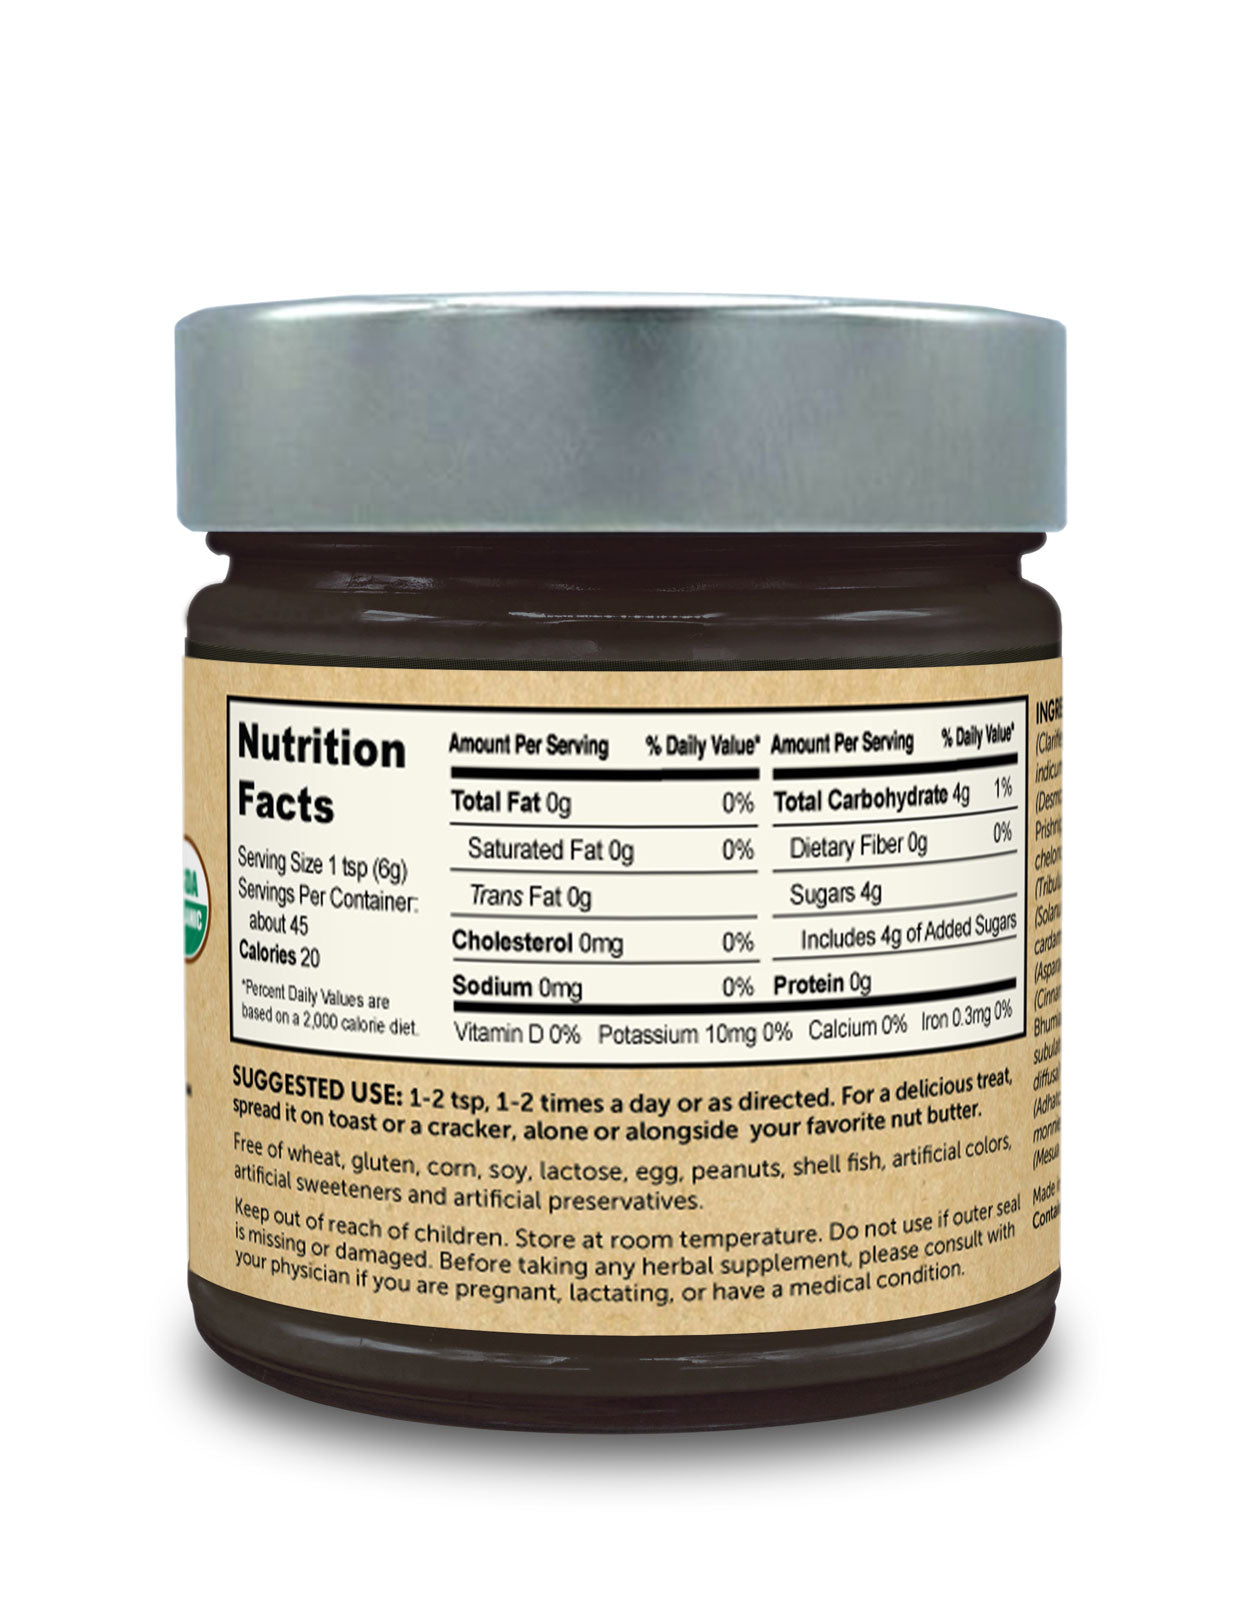 Back label of jar of Pure Indian Foods organic chyawanprash jam. Shows nutrition facts label as well as suggested use.